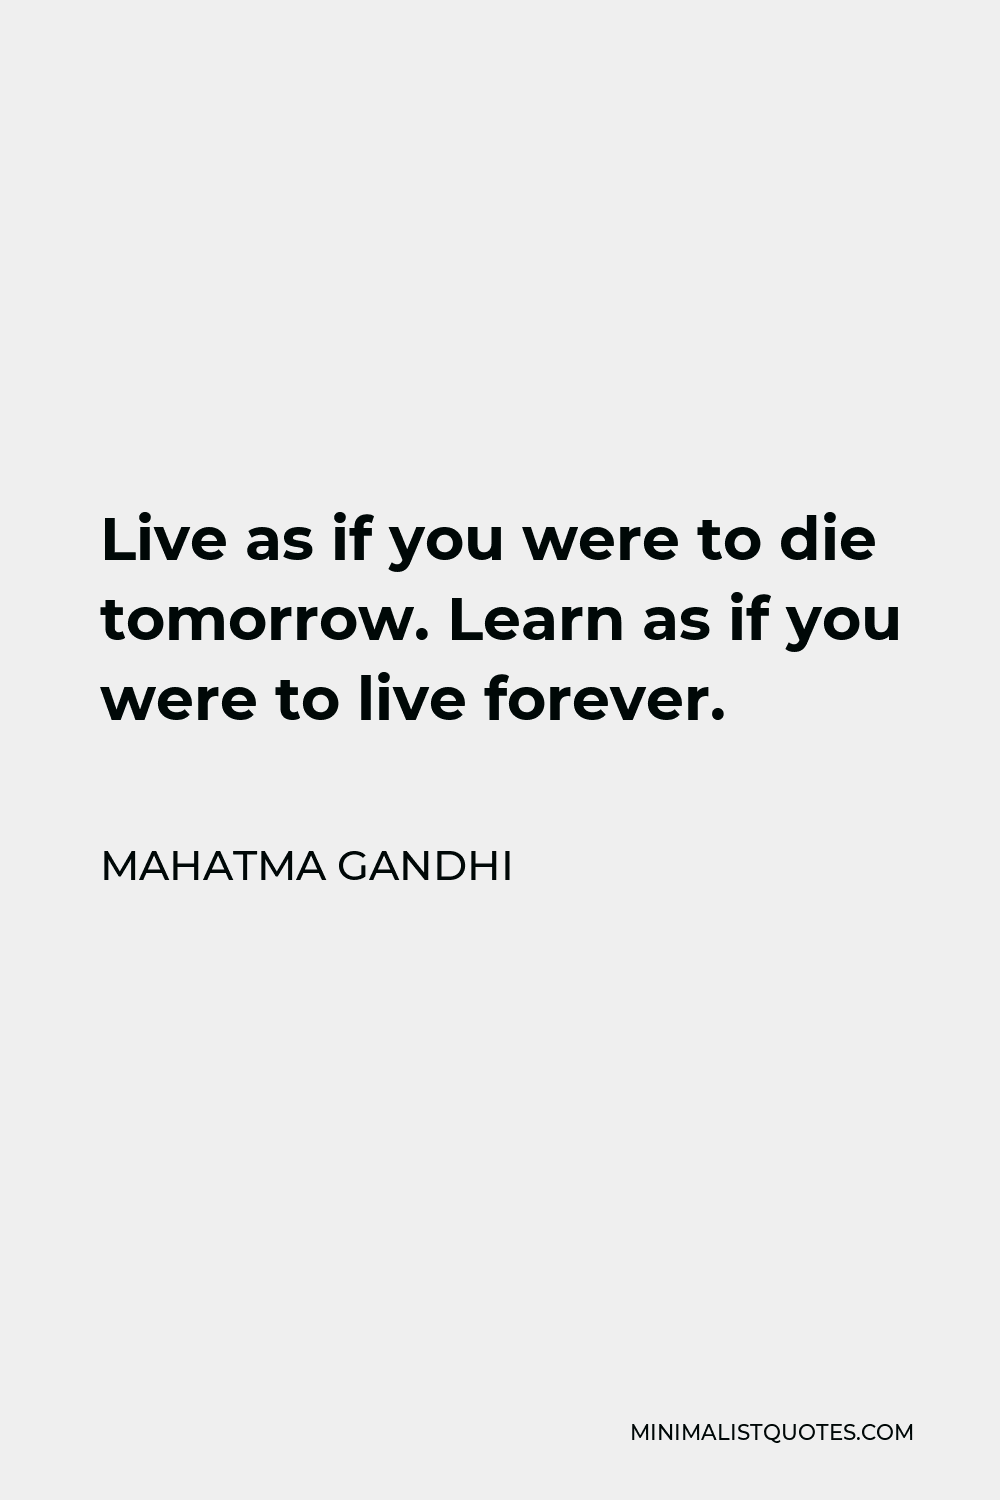 Mahatma Gandhi Quote: Live as if you were to die tomorrow. Learn as if ...